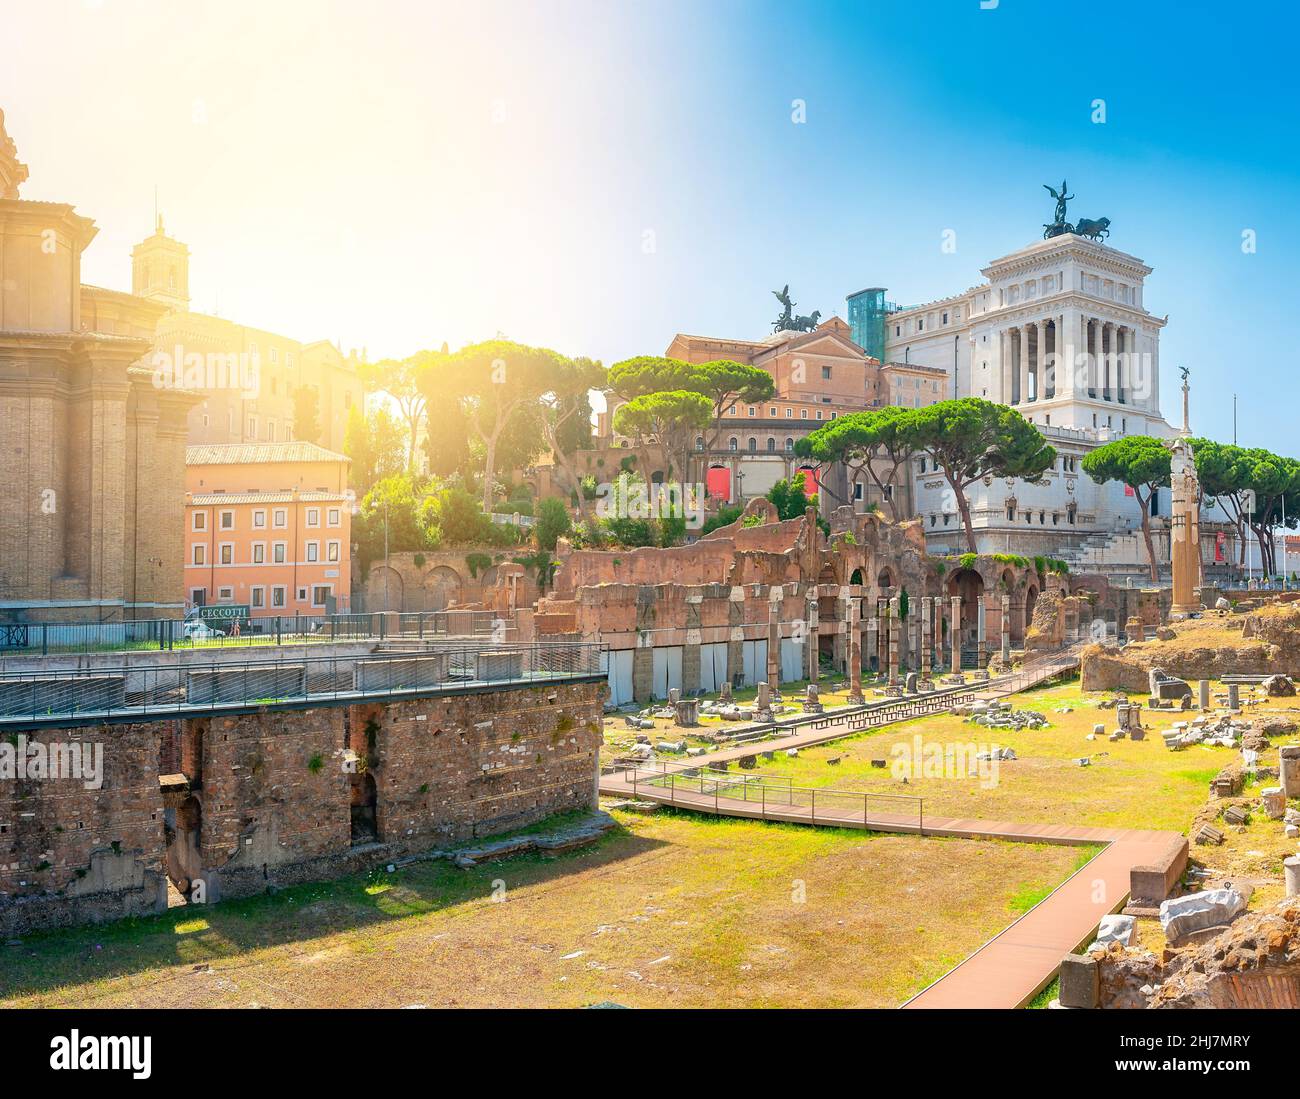 Panorama of the ruins of the ancient Roman forum at sunset, the most important place of ancient Rome. Antique architecture of Rome. above famous archi Stock Photo